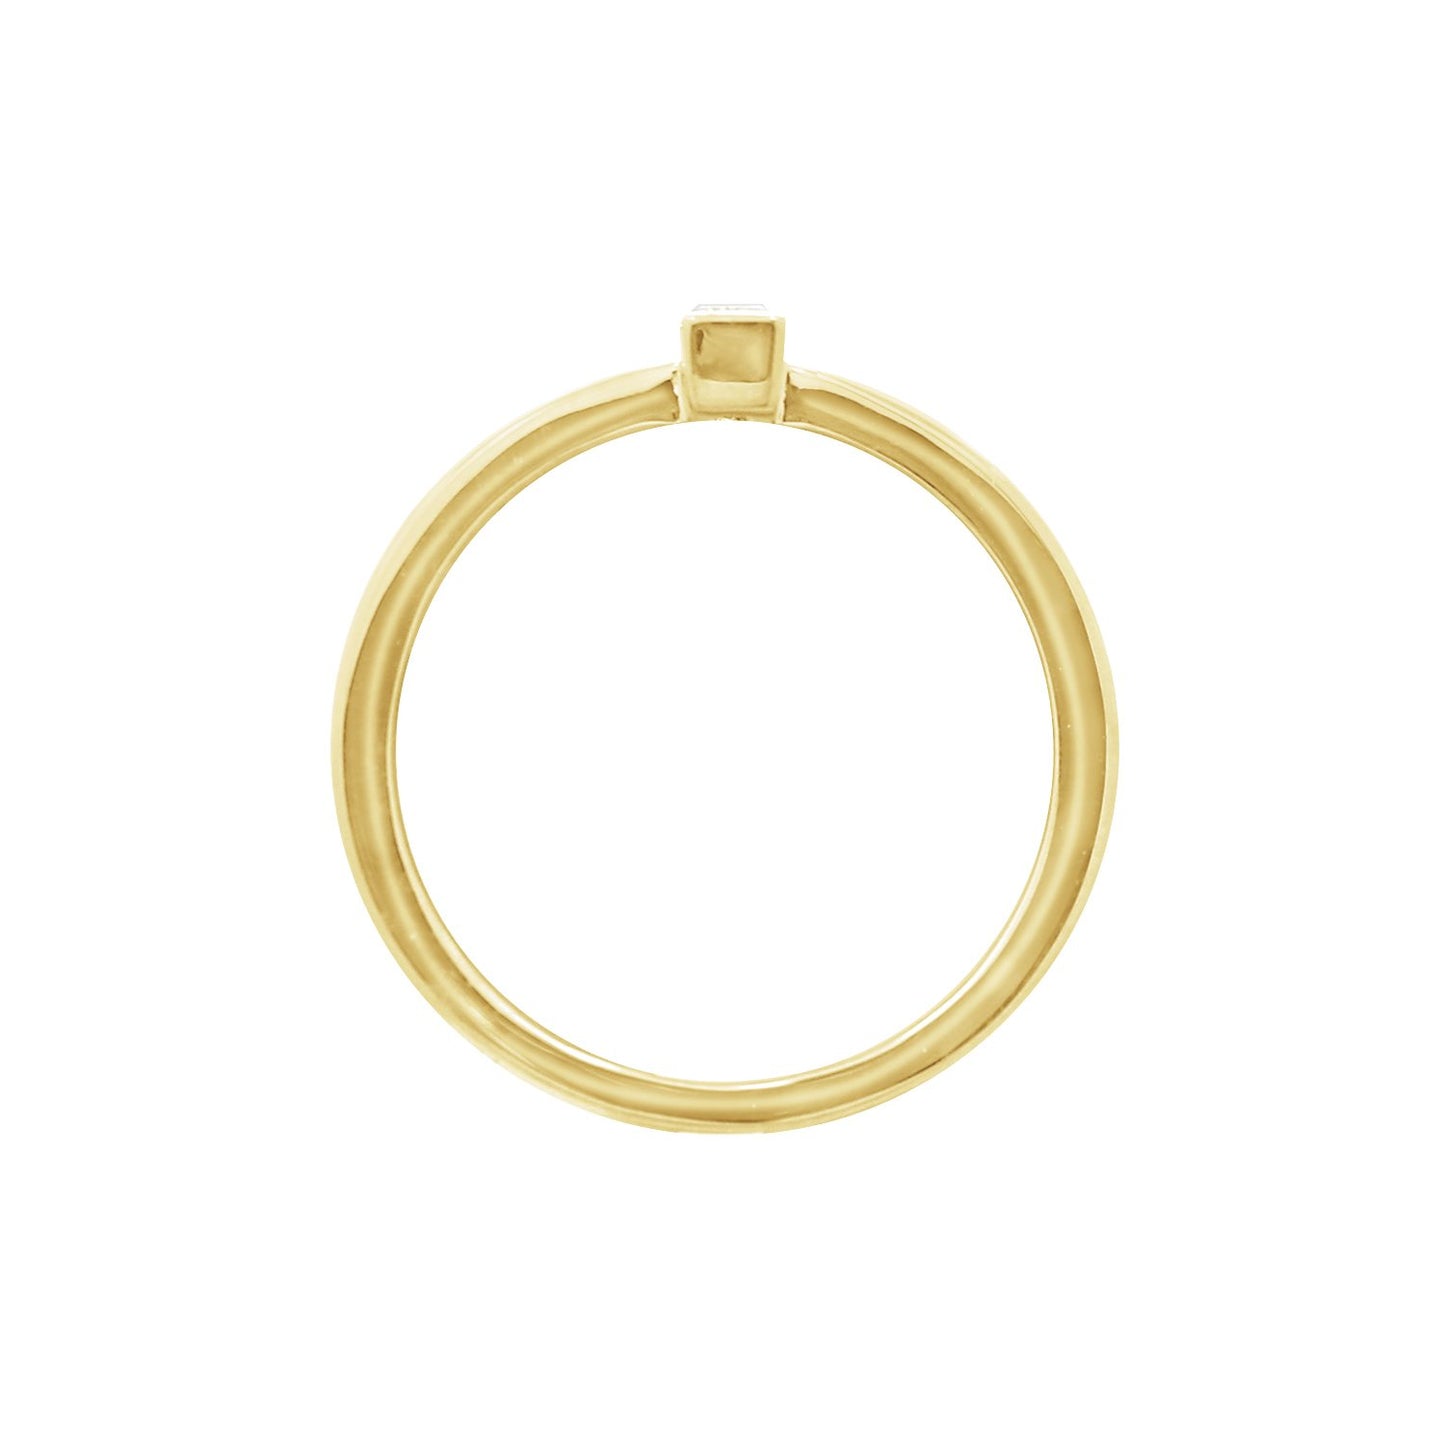 KIERA COUTURE RING BAR White Baguette Cut Yellow Gold Plated Sterling Silver Solitaire Daity Ring